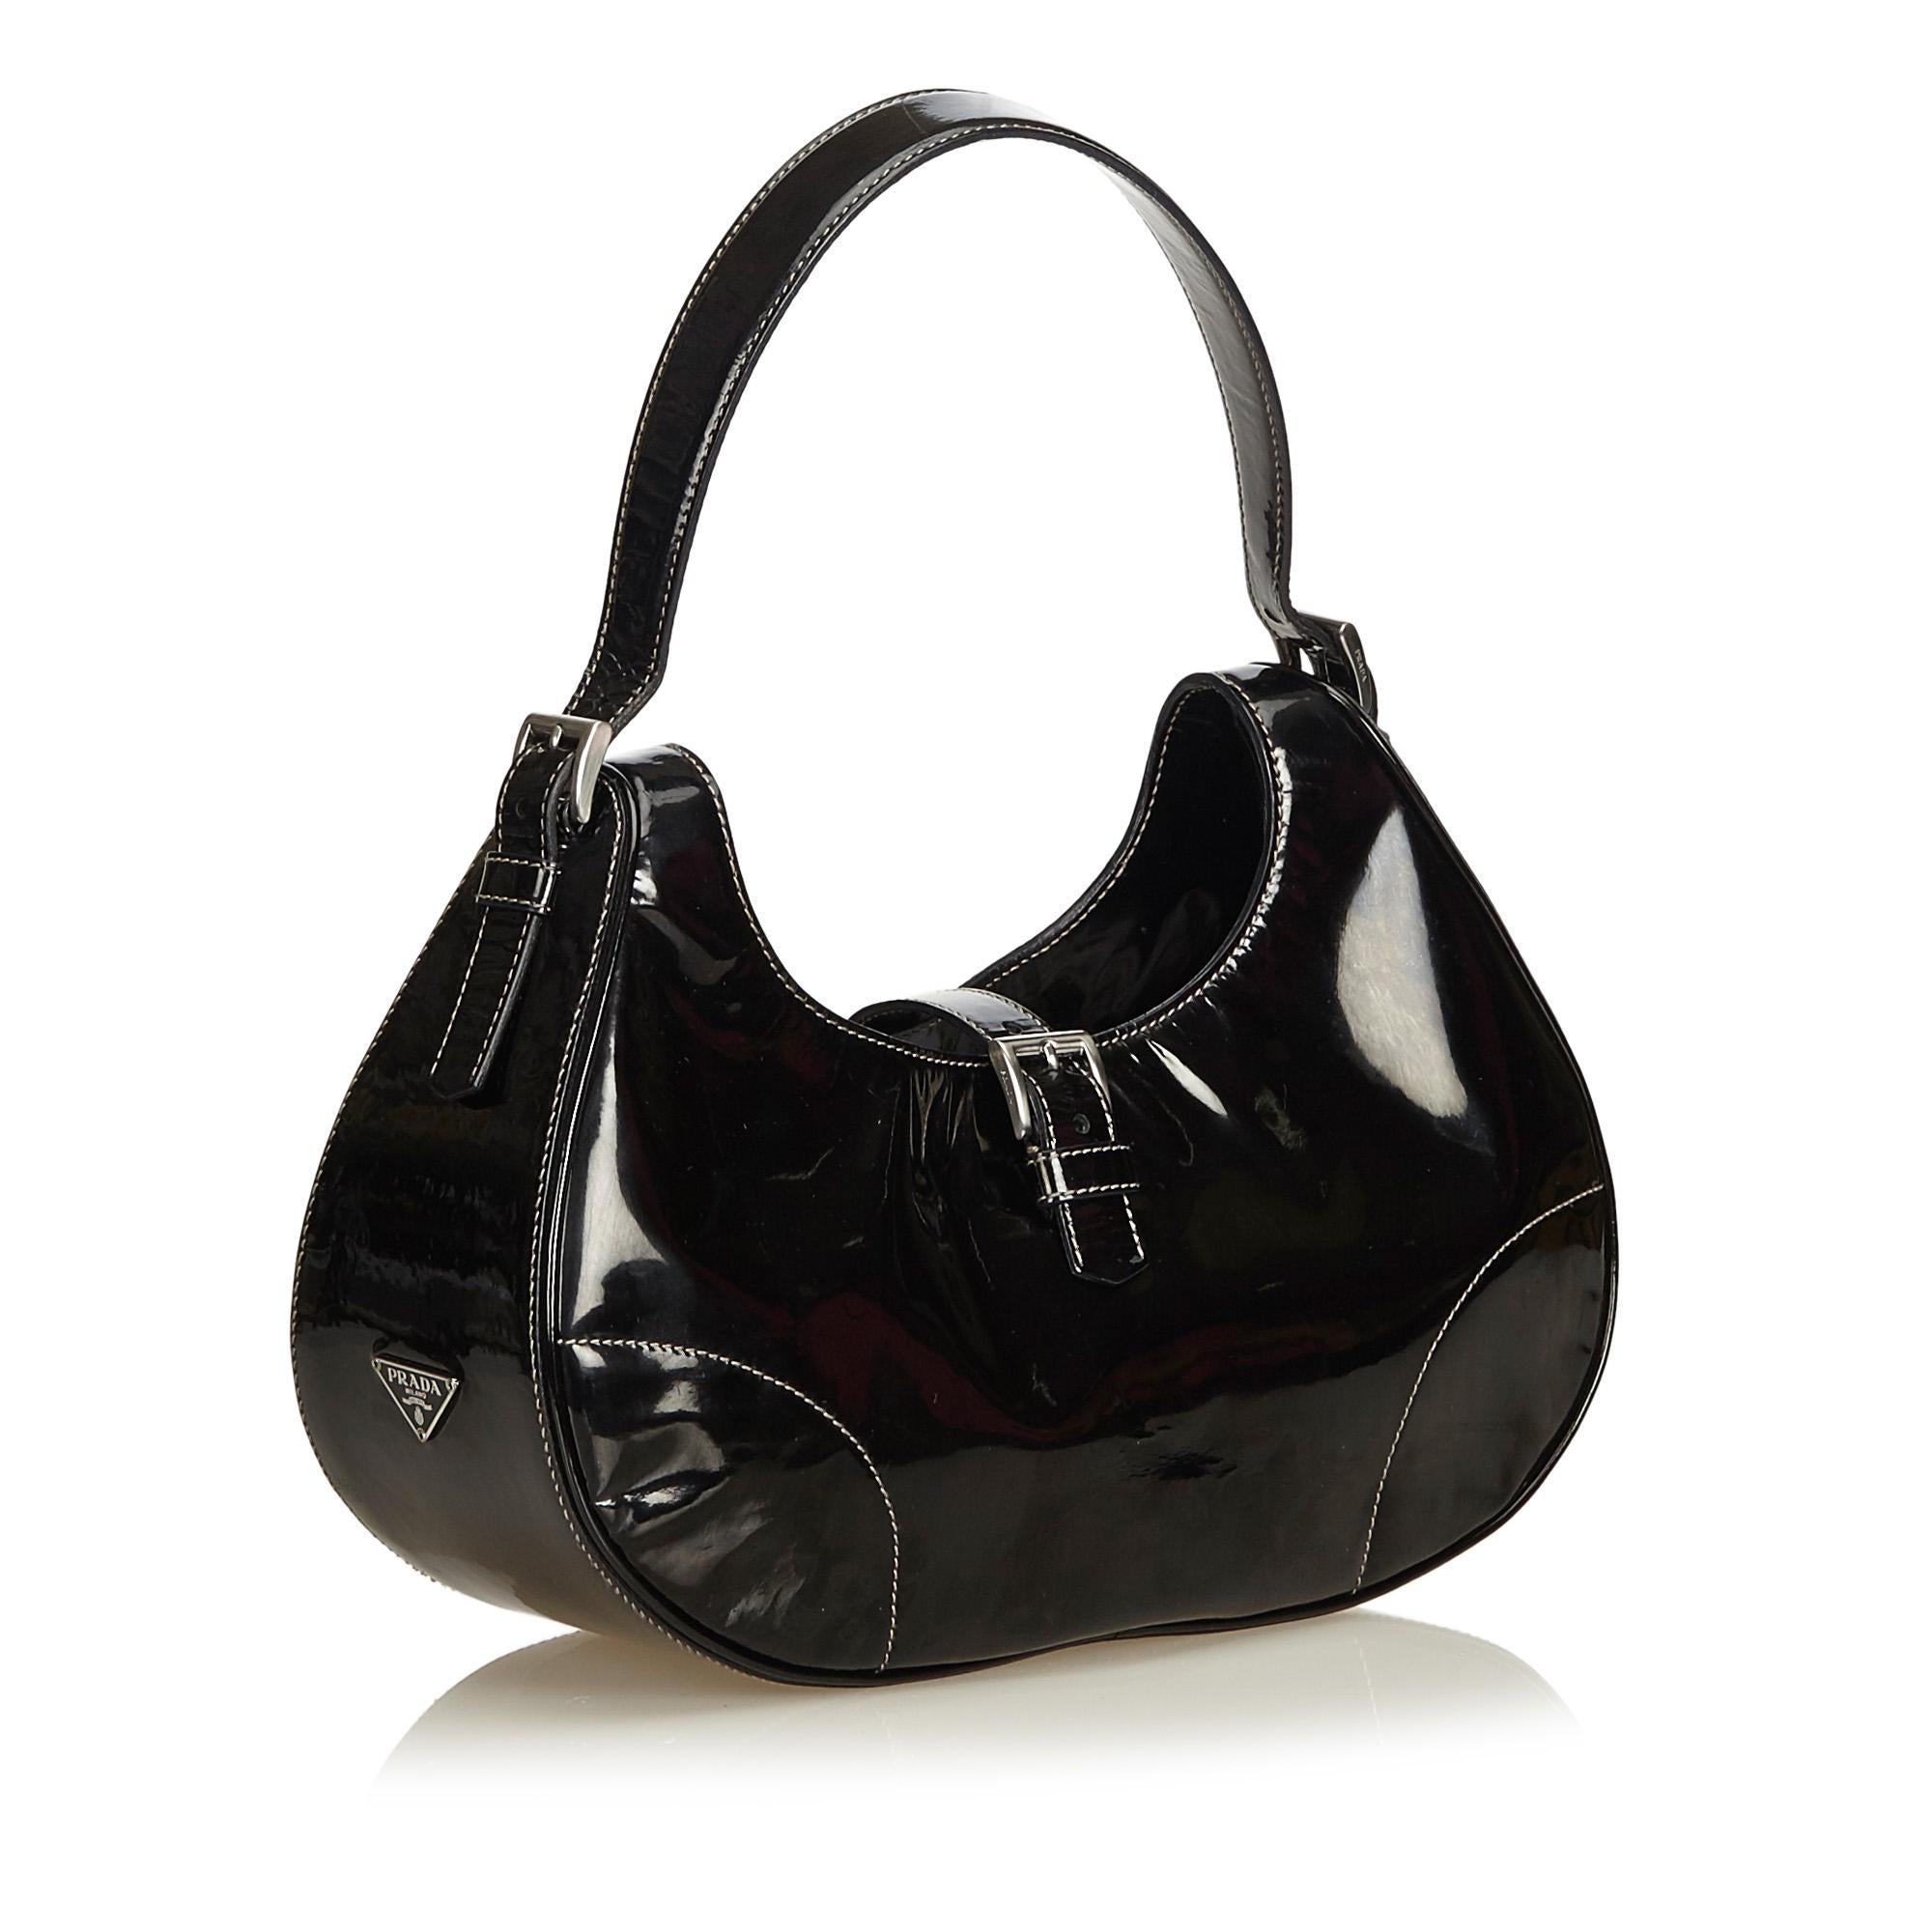 This hobo bag features a leather body, adjustable leather handle, open top with front strap and belt buckle closure, and an interior zip pocket. It carries as AB condition rating.

Inclusions: 
This item does not come with